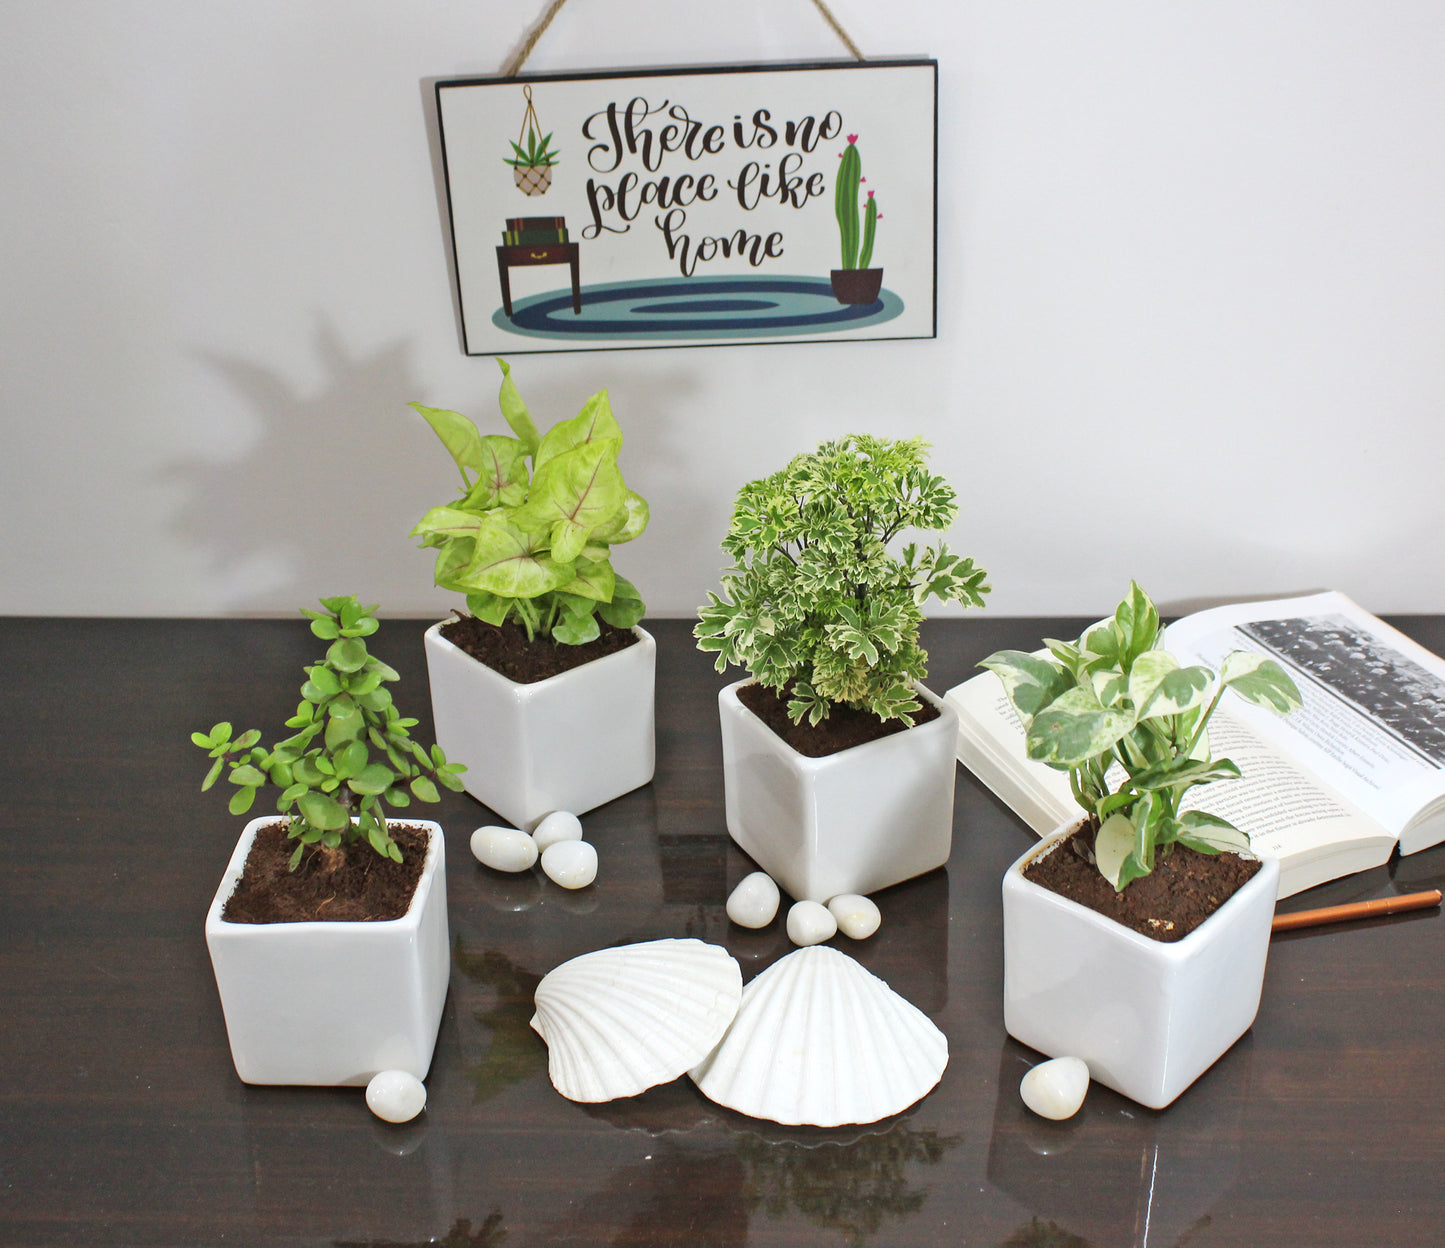 Rolling Nature Combo of Live Indoor Plants Jade, Aralia, Green Syngonium and Njoy Money plants in White Square Glacier Ceramic Pots